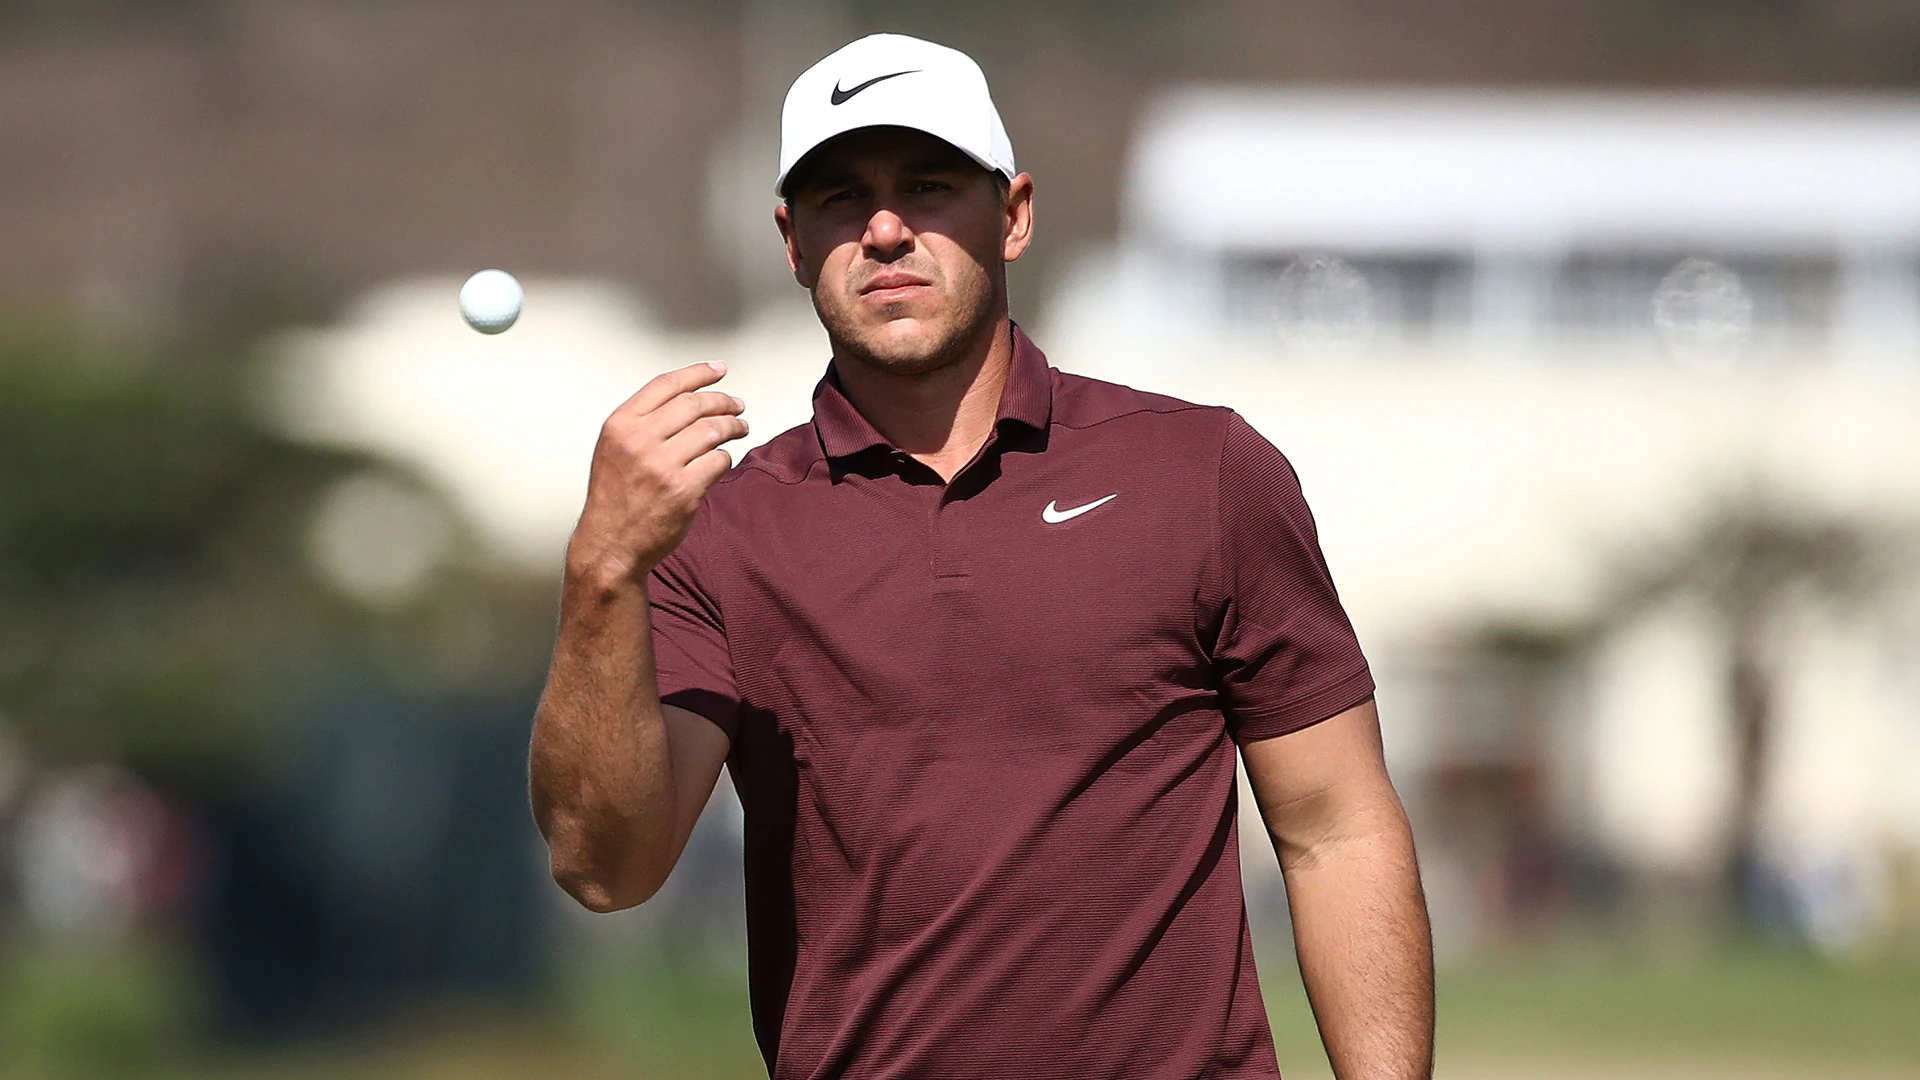 Koepka has his chance 'to earn' his way to No. 1